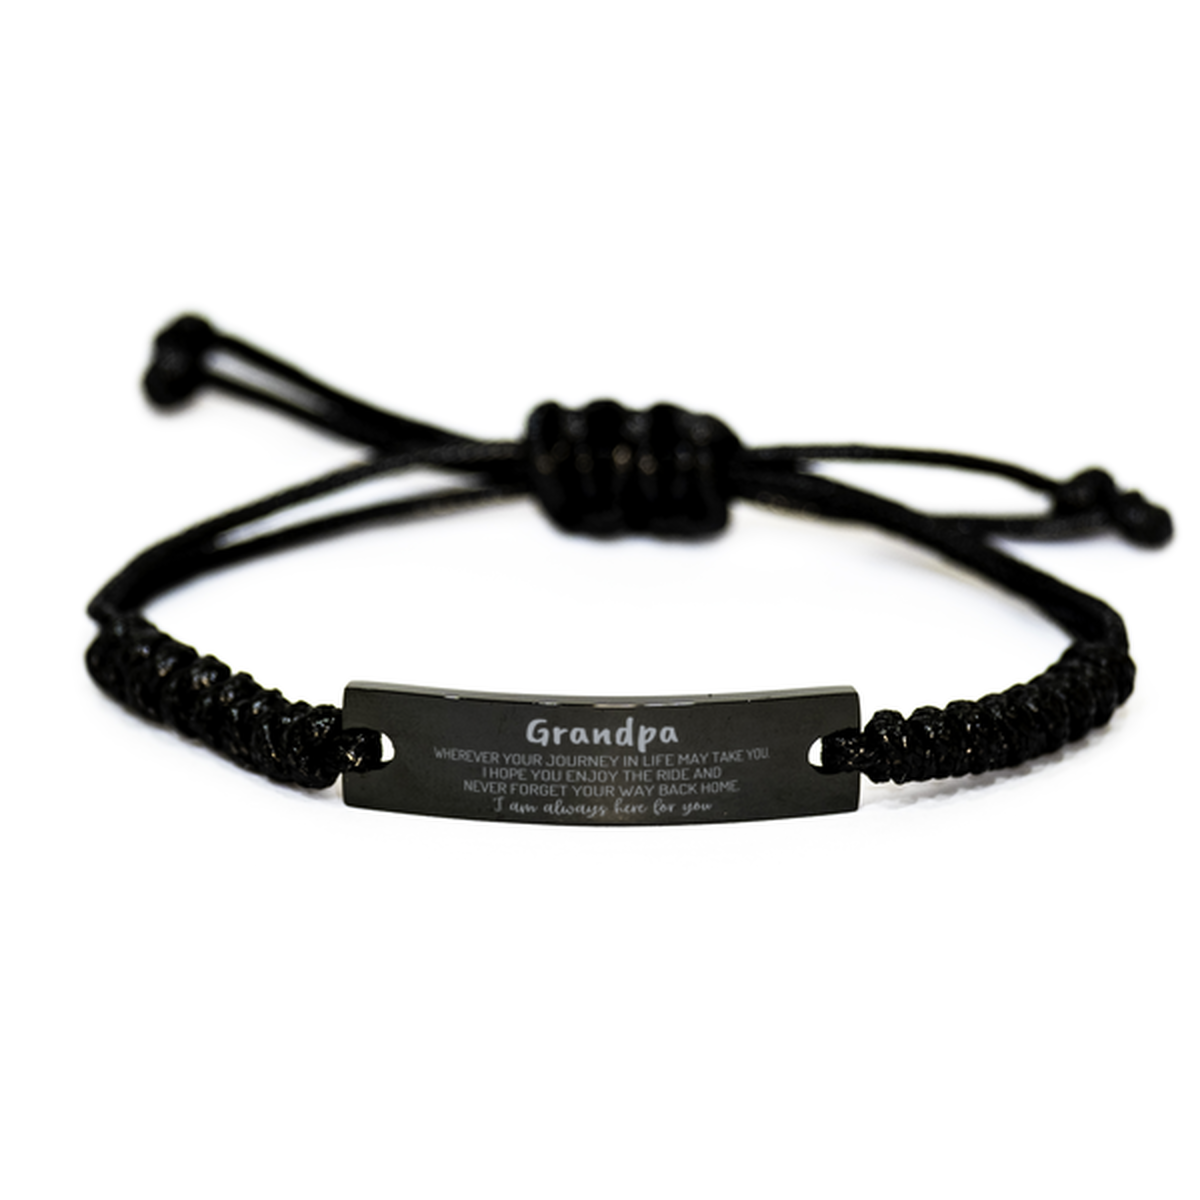 Grandpa wherever your journey in life may take you, I am always here for you Grandpa Black Rope Bracelet, Awesome Christmas Gifts For Grandpa, Grandpa Birthday Gifts for Men Women Family Loved One